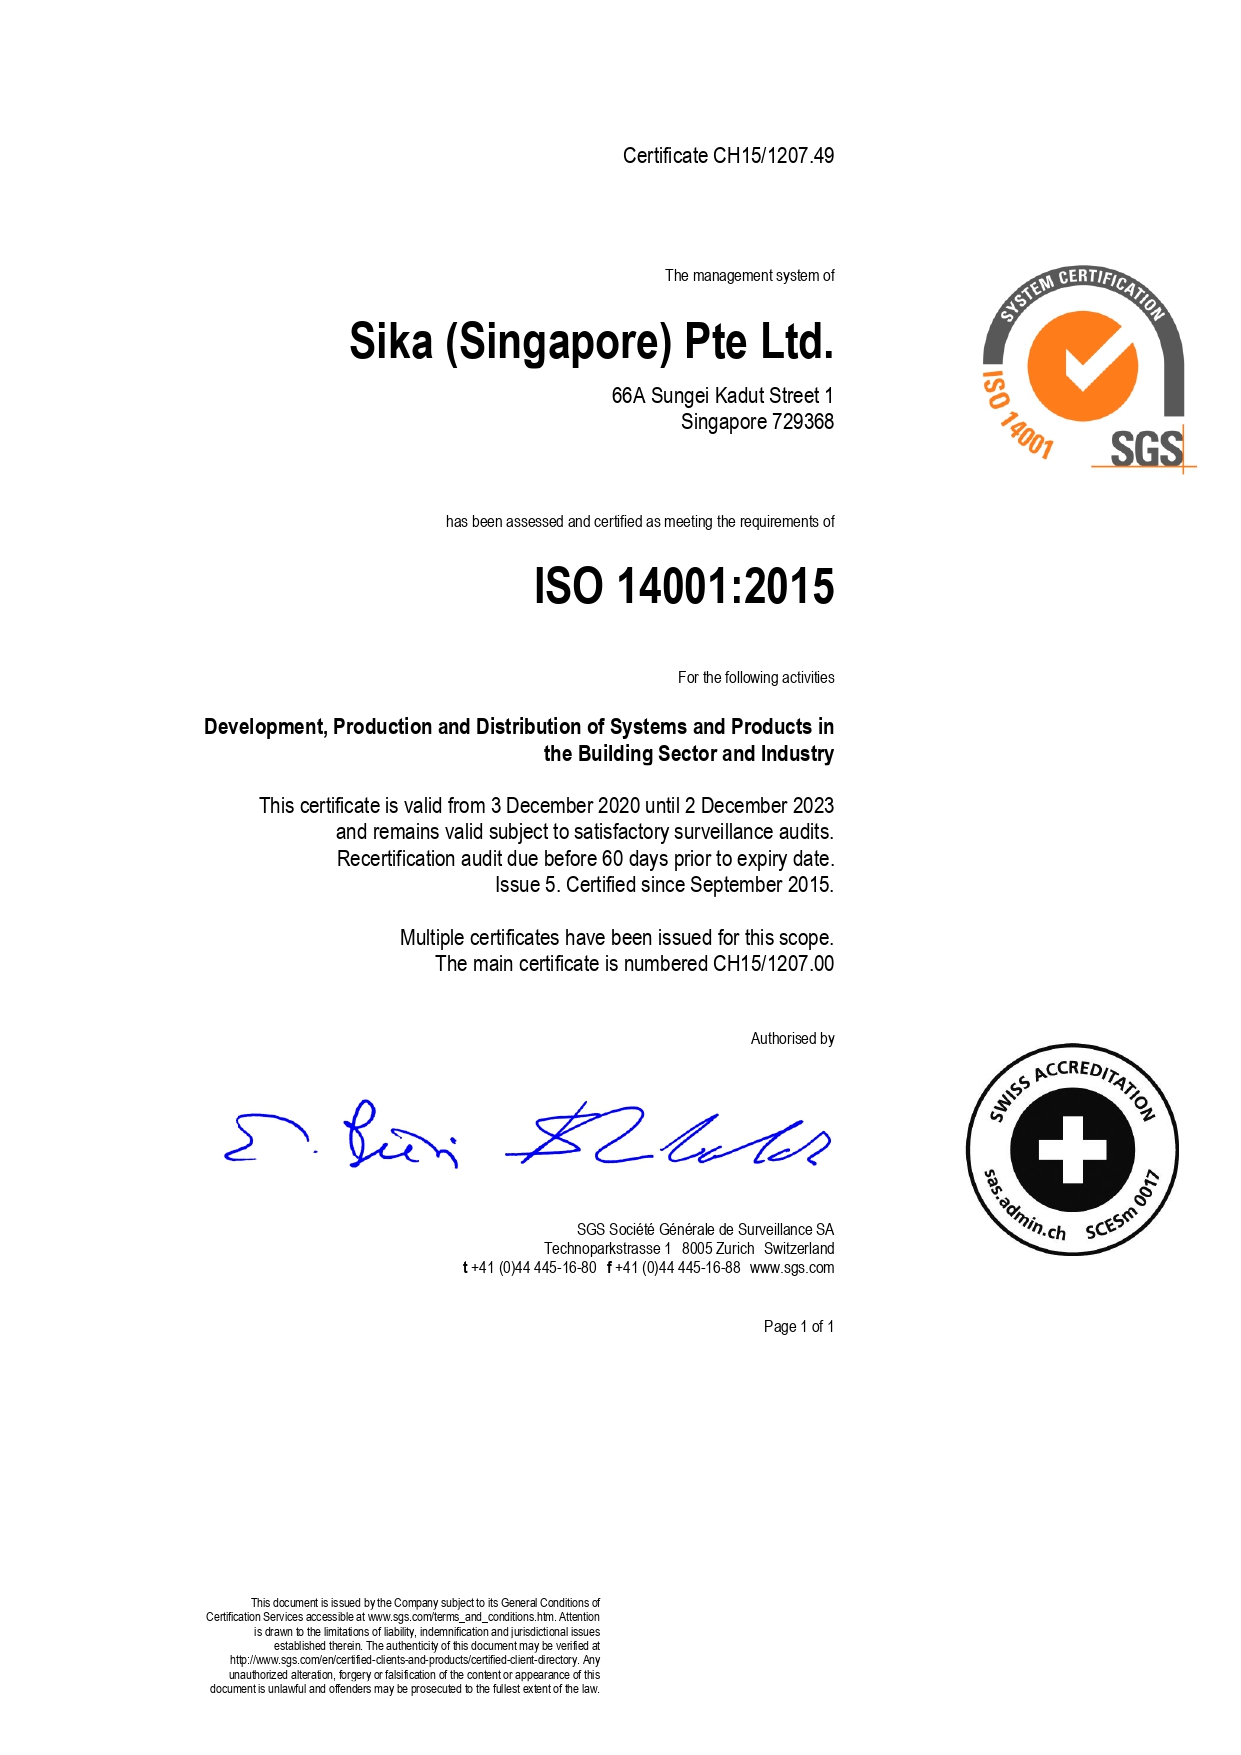 SIKA's APAC Single Certificate ISO 14001